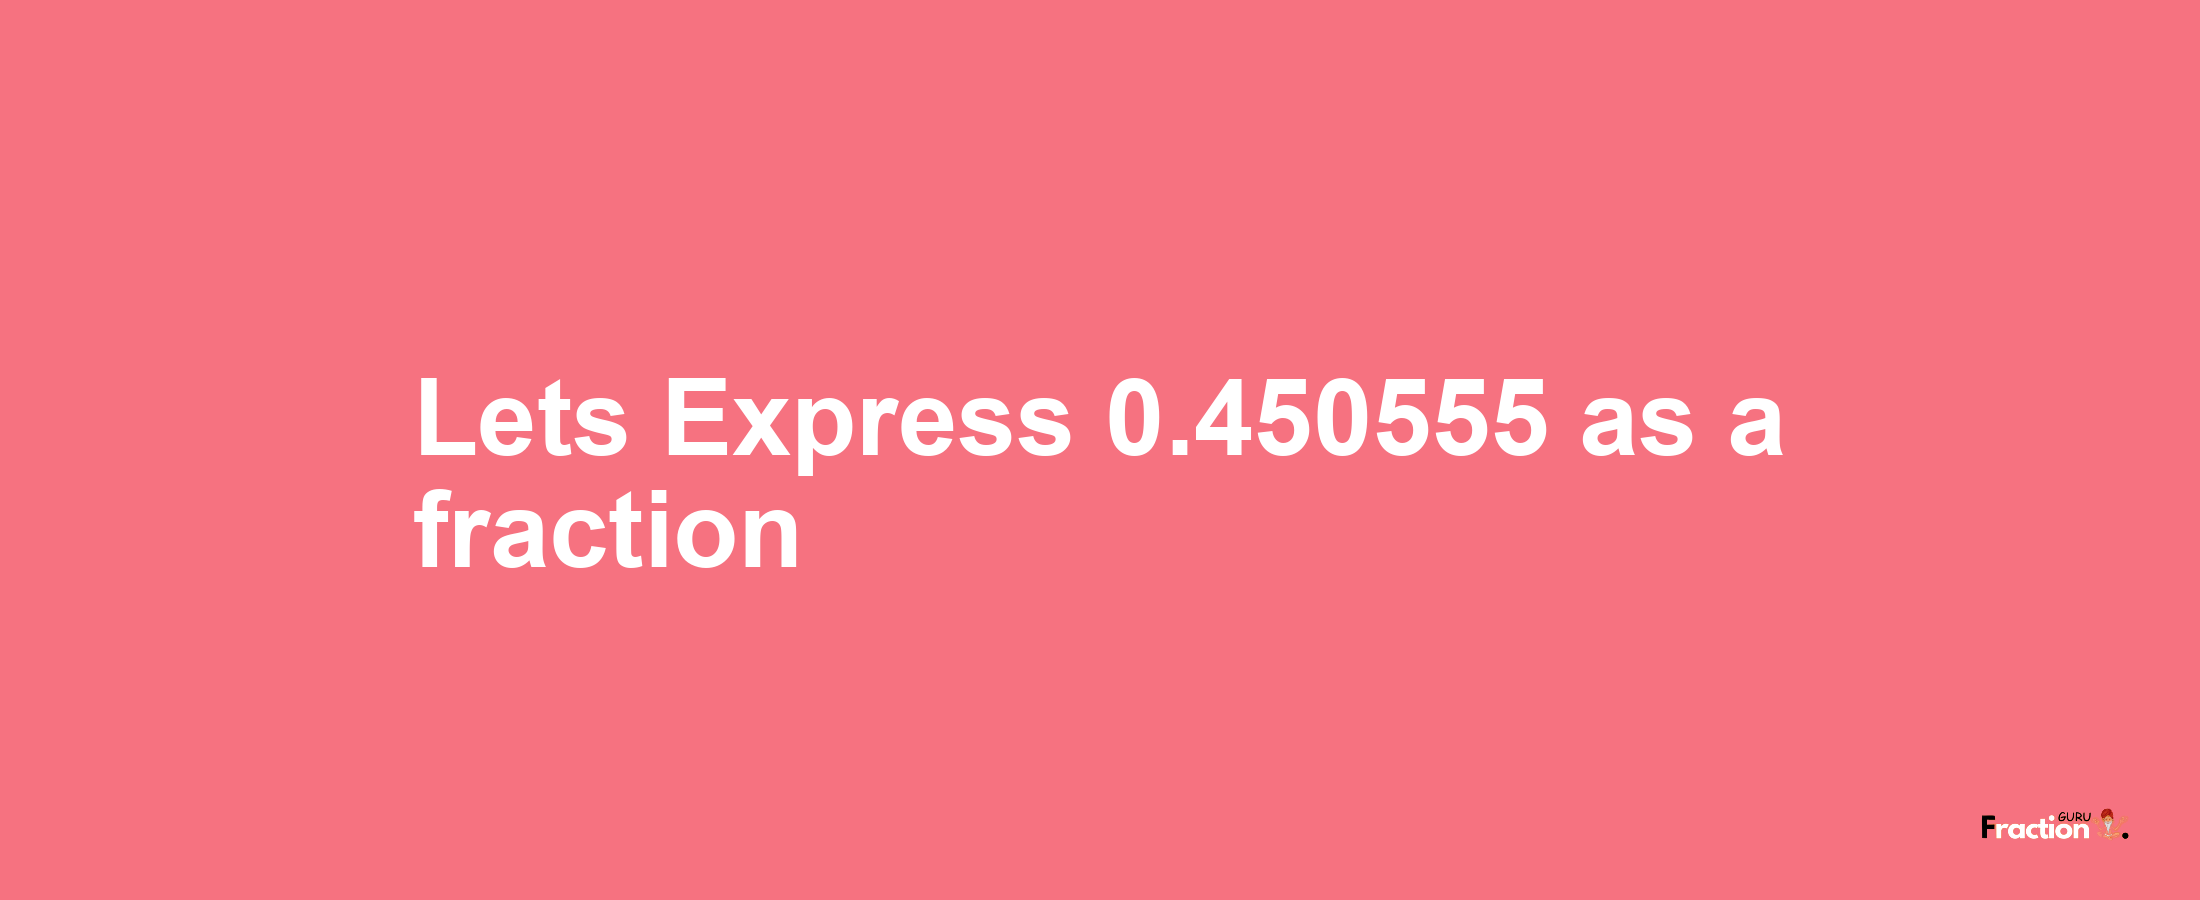 Lets Express 0.450555 as afraction